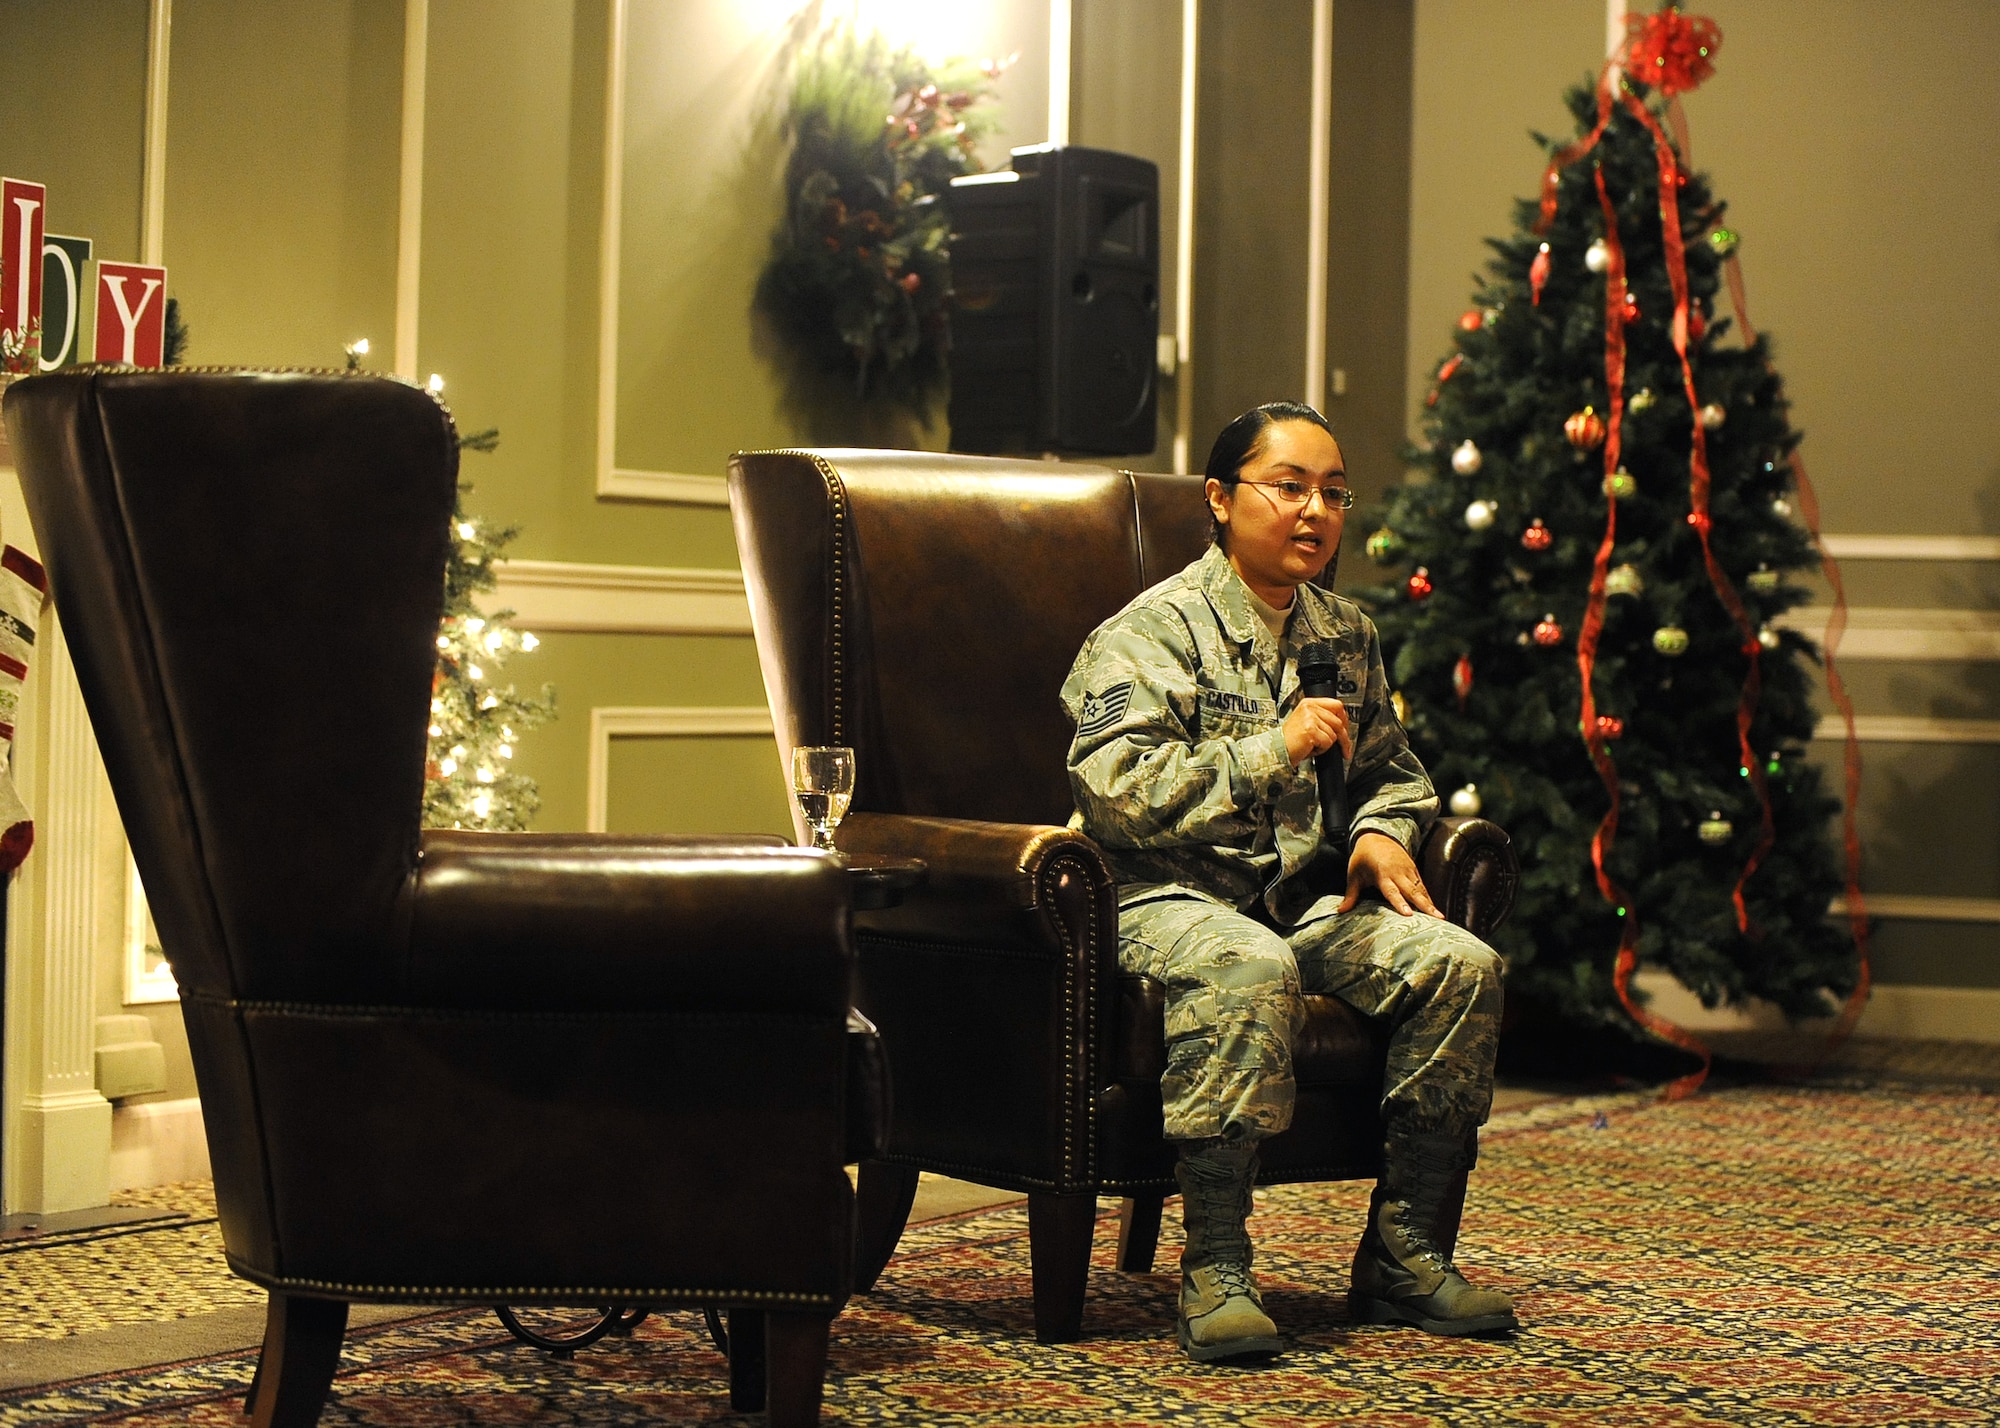 U.S. Air Force Tech. Sgt. Galicia Castillo, 55th Wing command post, opened up during the inaugural Story Tellers event called ‘The Long and Short of it’ held on Dec. 16 at the Patriot Club on Offutt Air Force Base, Neb. Castillo spoke about her struggles with depression and the help she sought and how it affected her career.   (U.S. Air Force photo by Josh Plueger/Released)